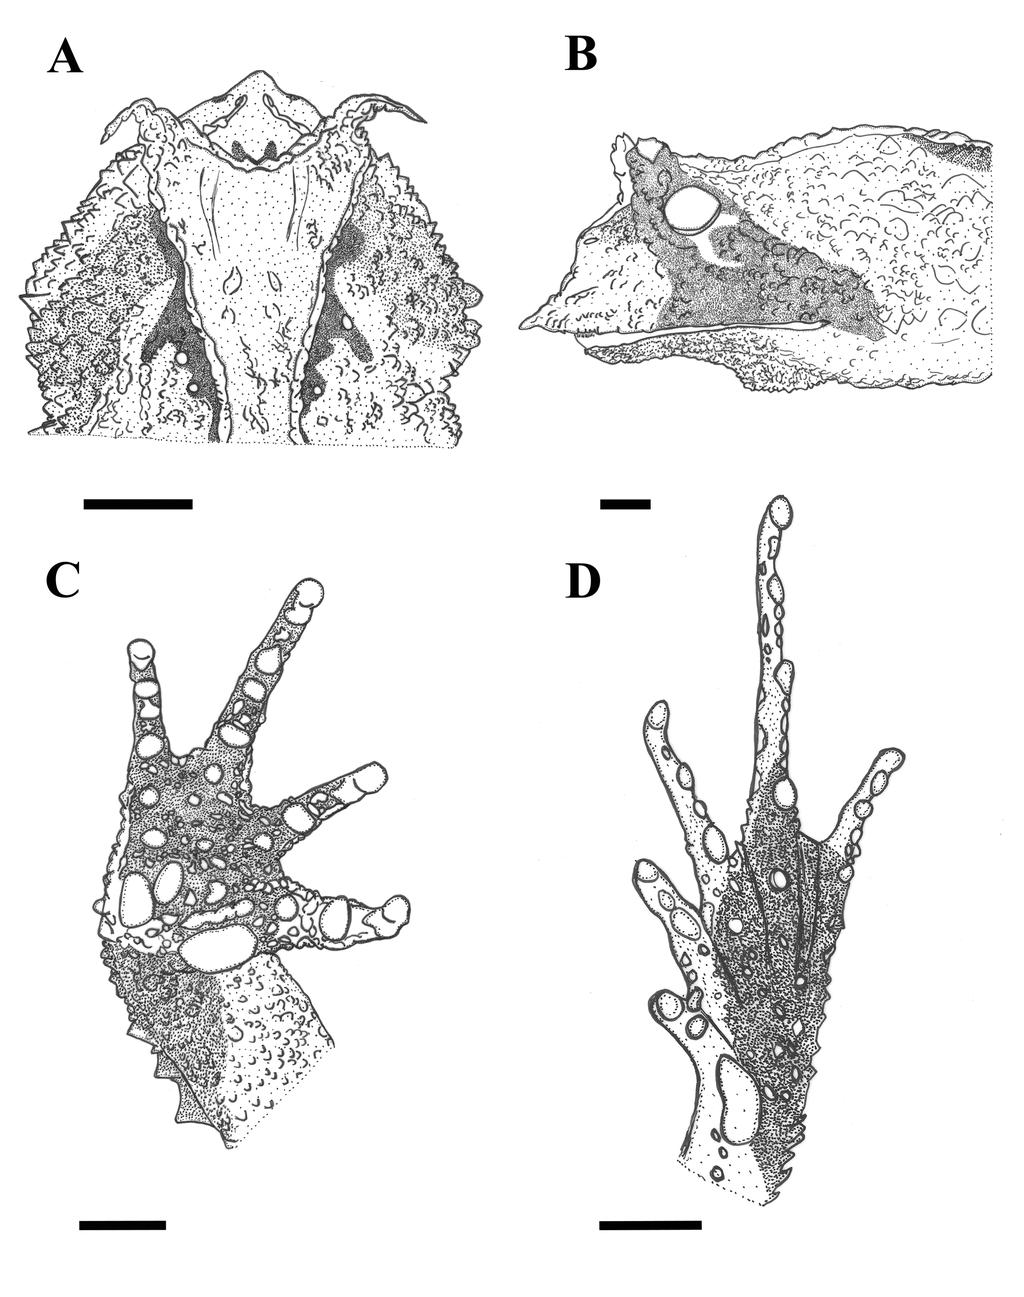 FIGURE 9. Dorsal (A) and lateral (B) views of the head; hand (C); and foot (D) of the holotype of Proceratophrys izecksohni sp.nov. (CFBH 16283; SVL 56.6 mm). Scale bar = 3,5 mm.